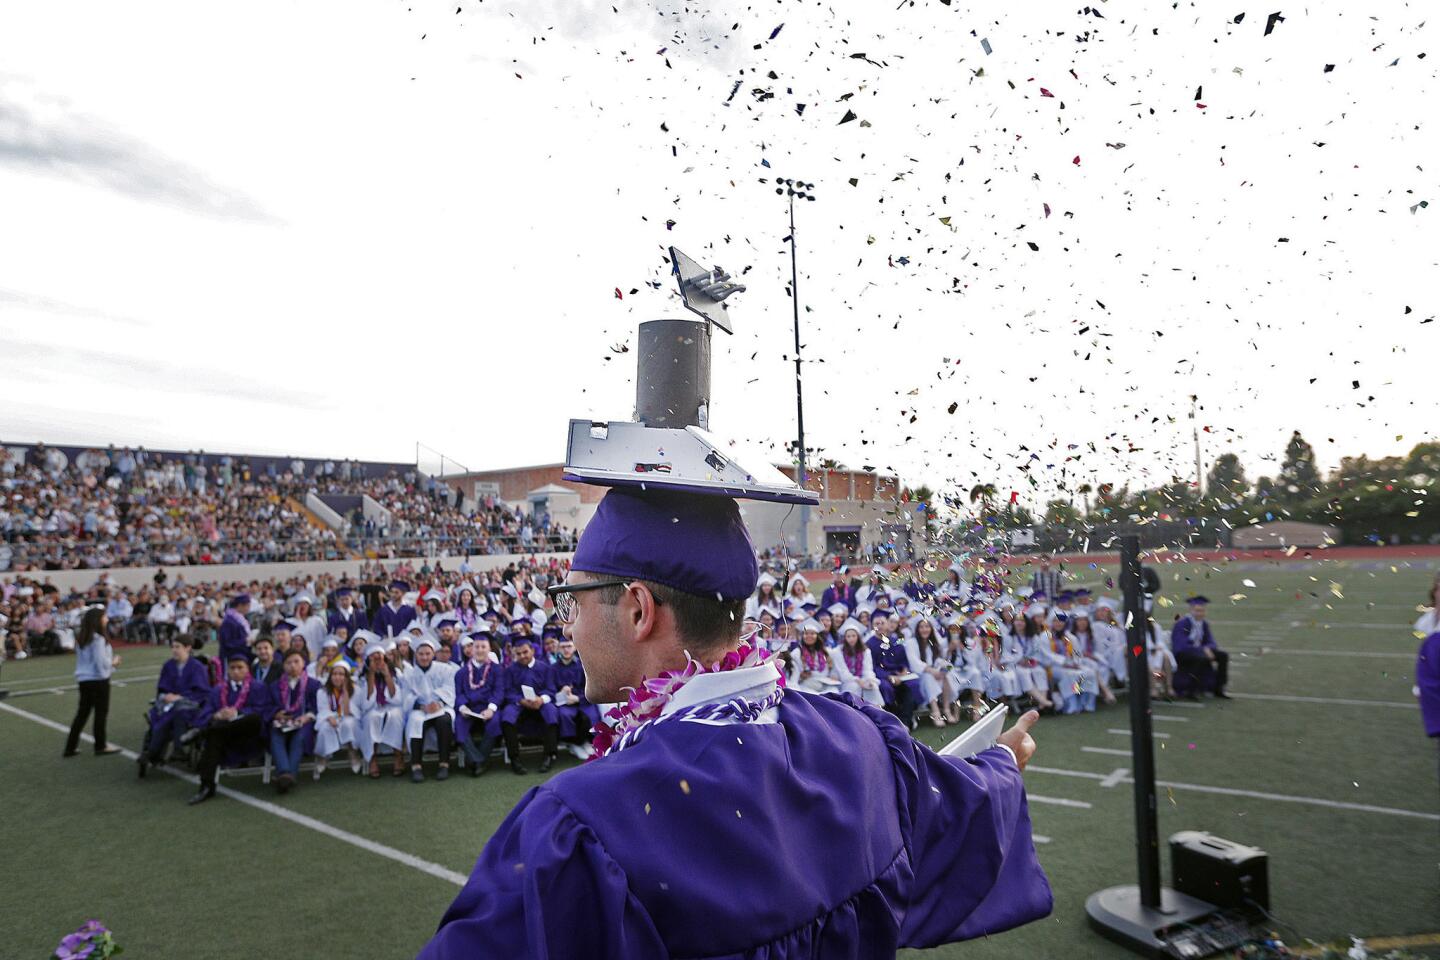 Graduating senior Henry Pruett triggers a burst of confetti from a cone atop his graduation cap as he exits the main stage after graduating at the graduation ceremony for Hoover High School at Hoover High School in Glendale on Monday, June 10, 2019.